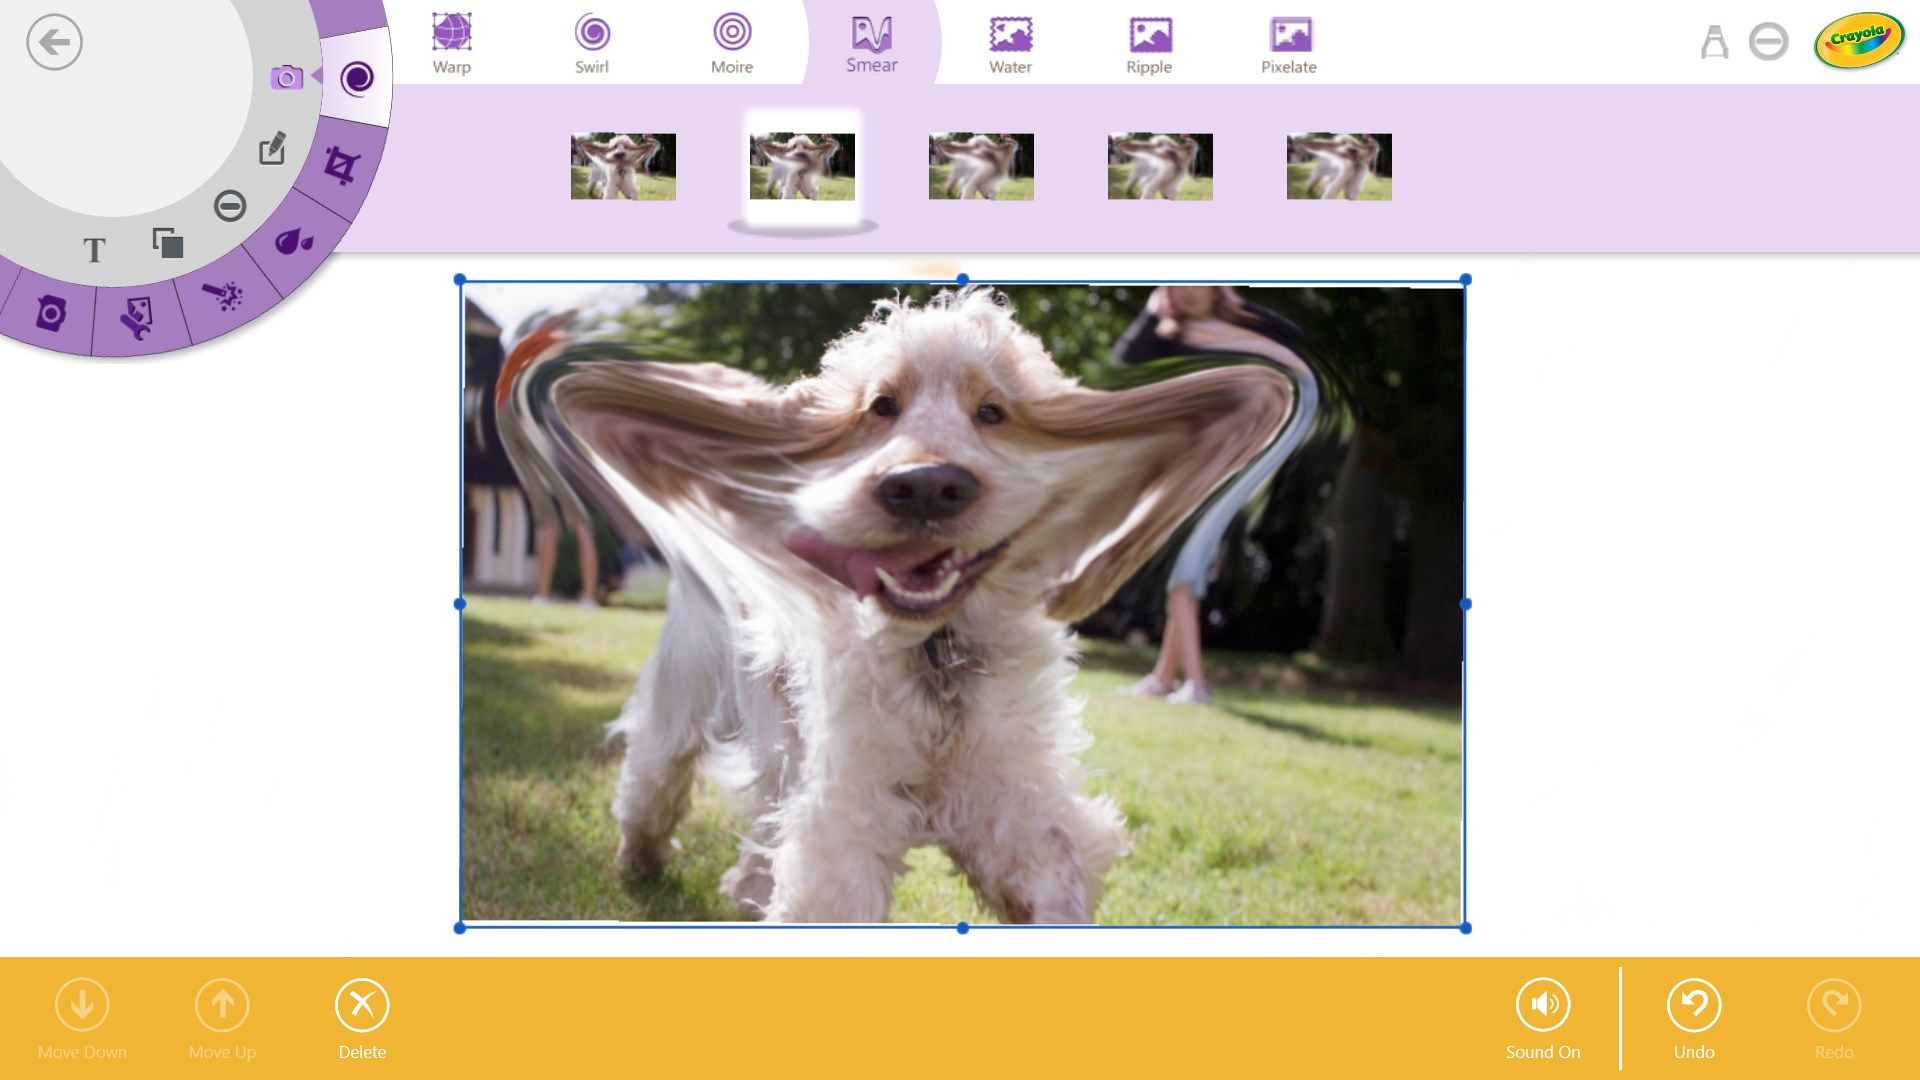 Create fun effects by morphing and stretching images.